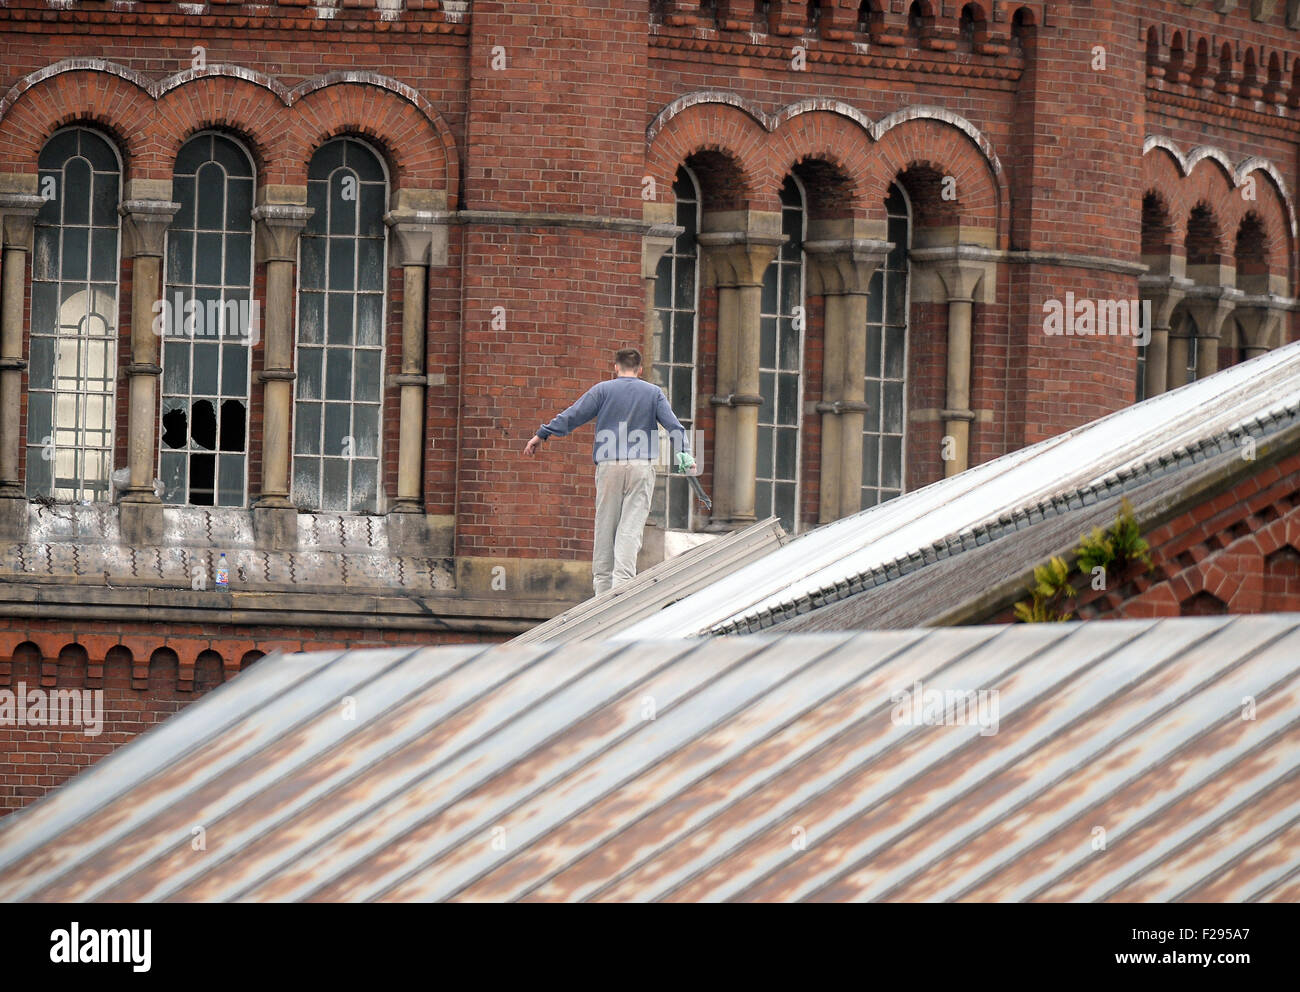 Prisoner Stuart Horner pictured on the roof of HMP Manchester. Stuart Horner's one man protest is about prison conditions Stock Photo